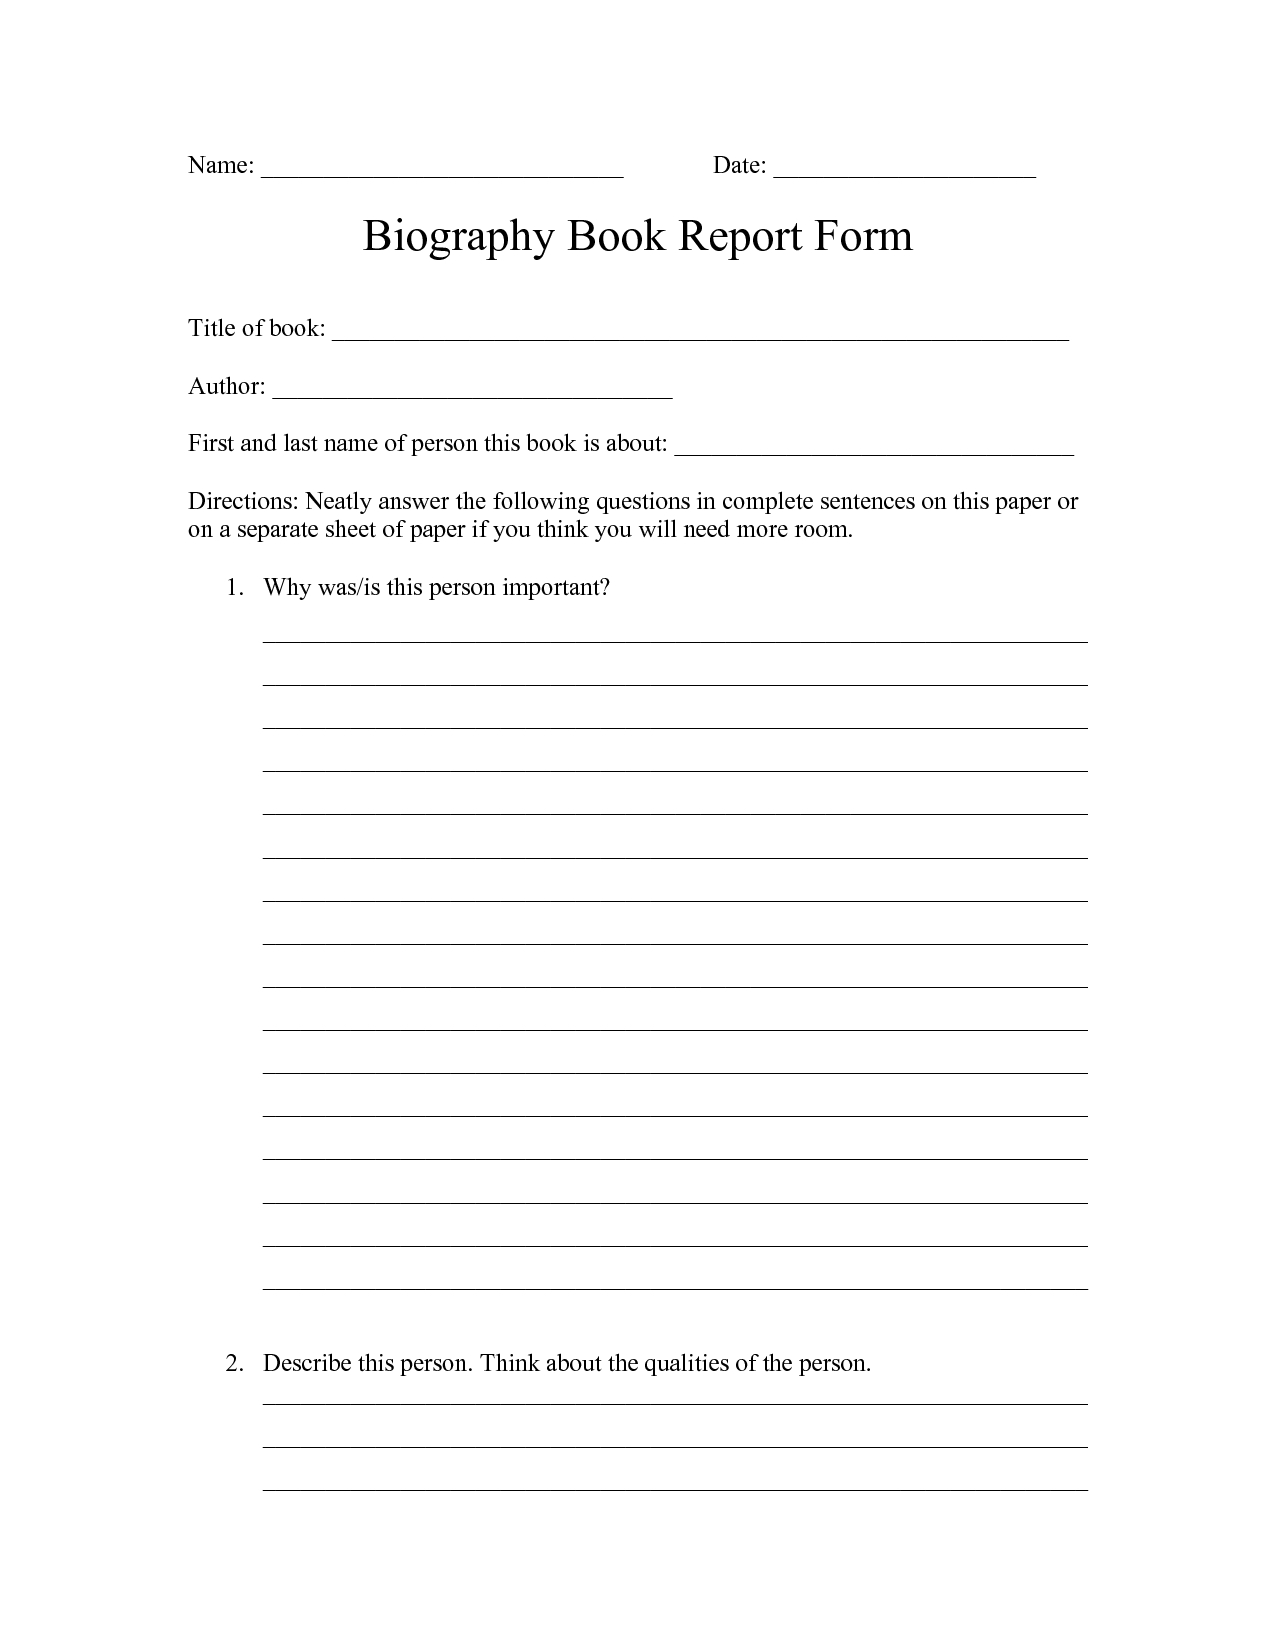 Elementary Book Report Worksheet | Printable Worksheets And Inside Biography Book Report Template